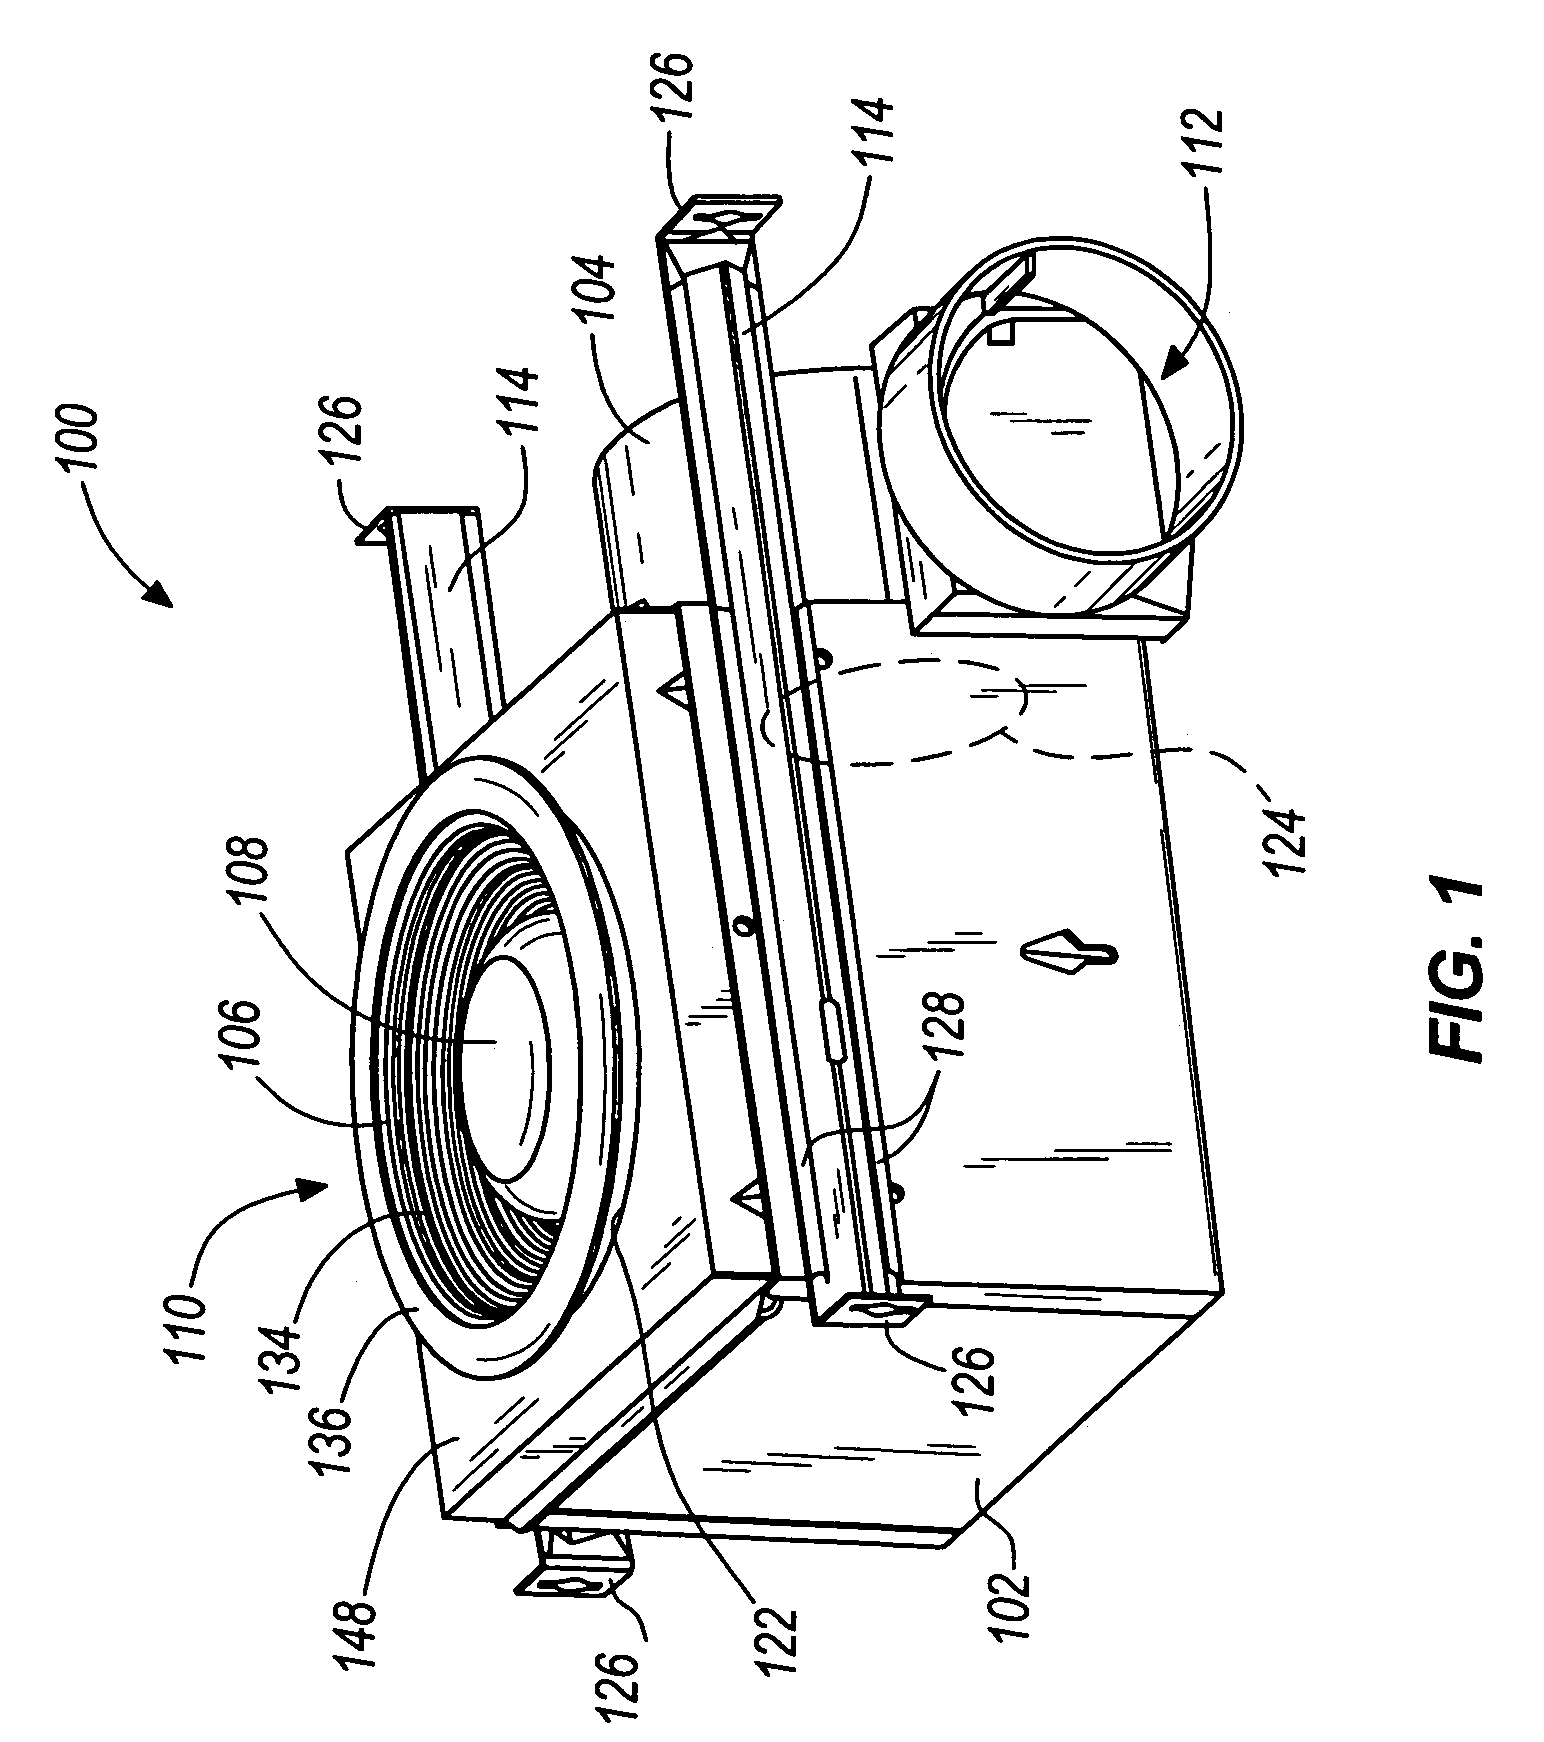 Lighting and ventilating apparatus and method